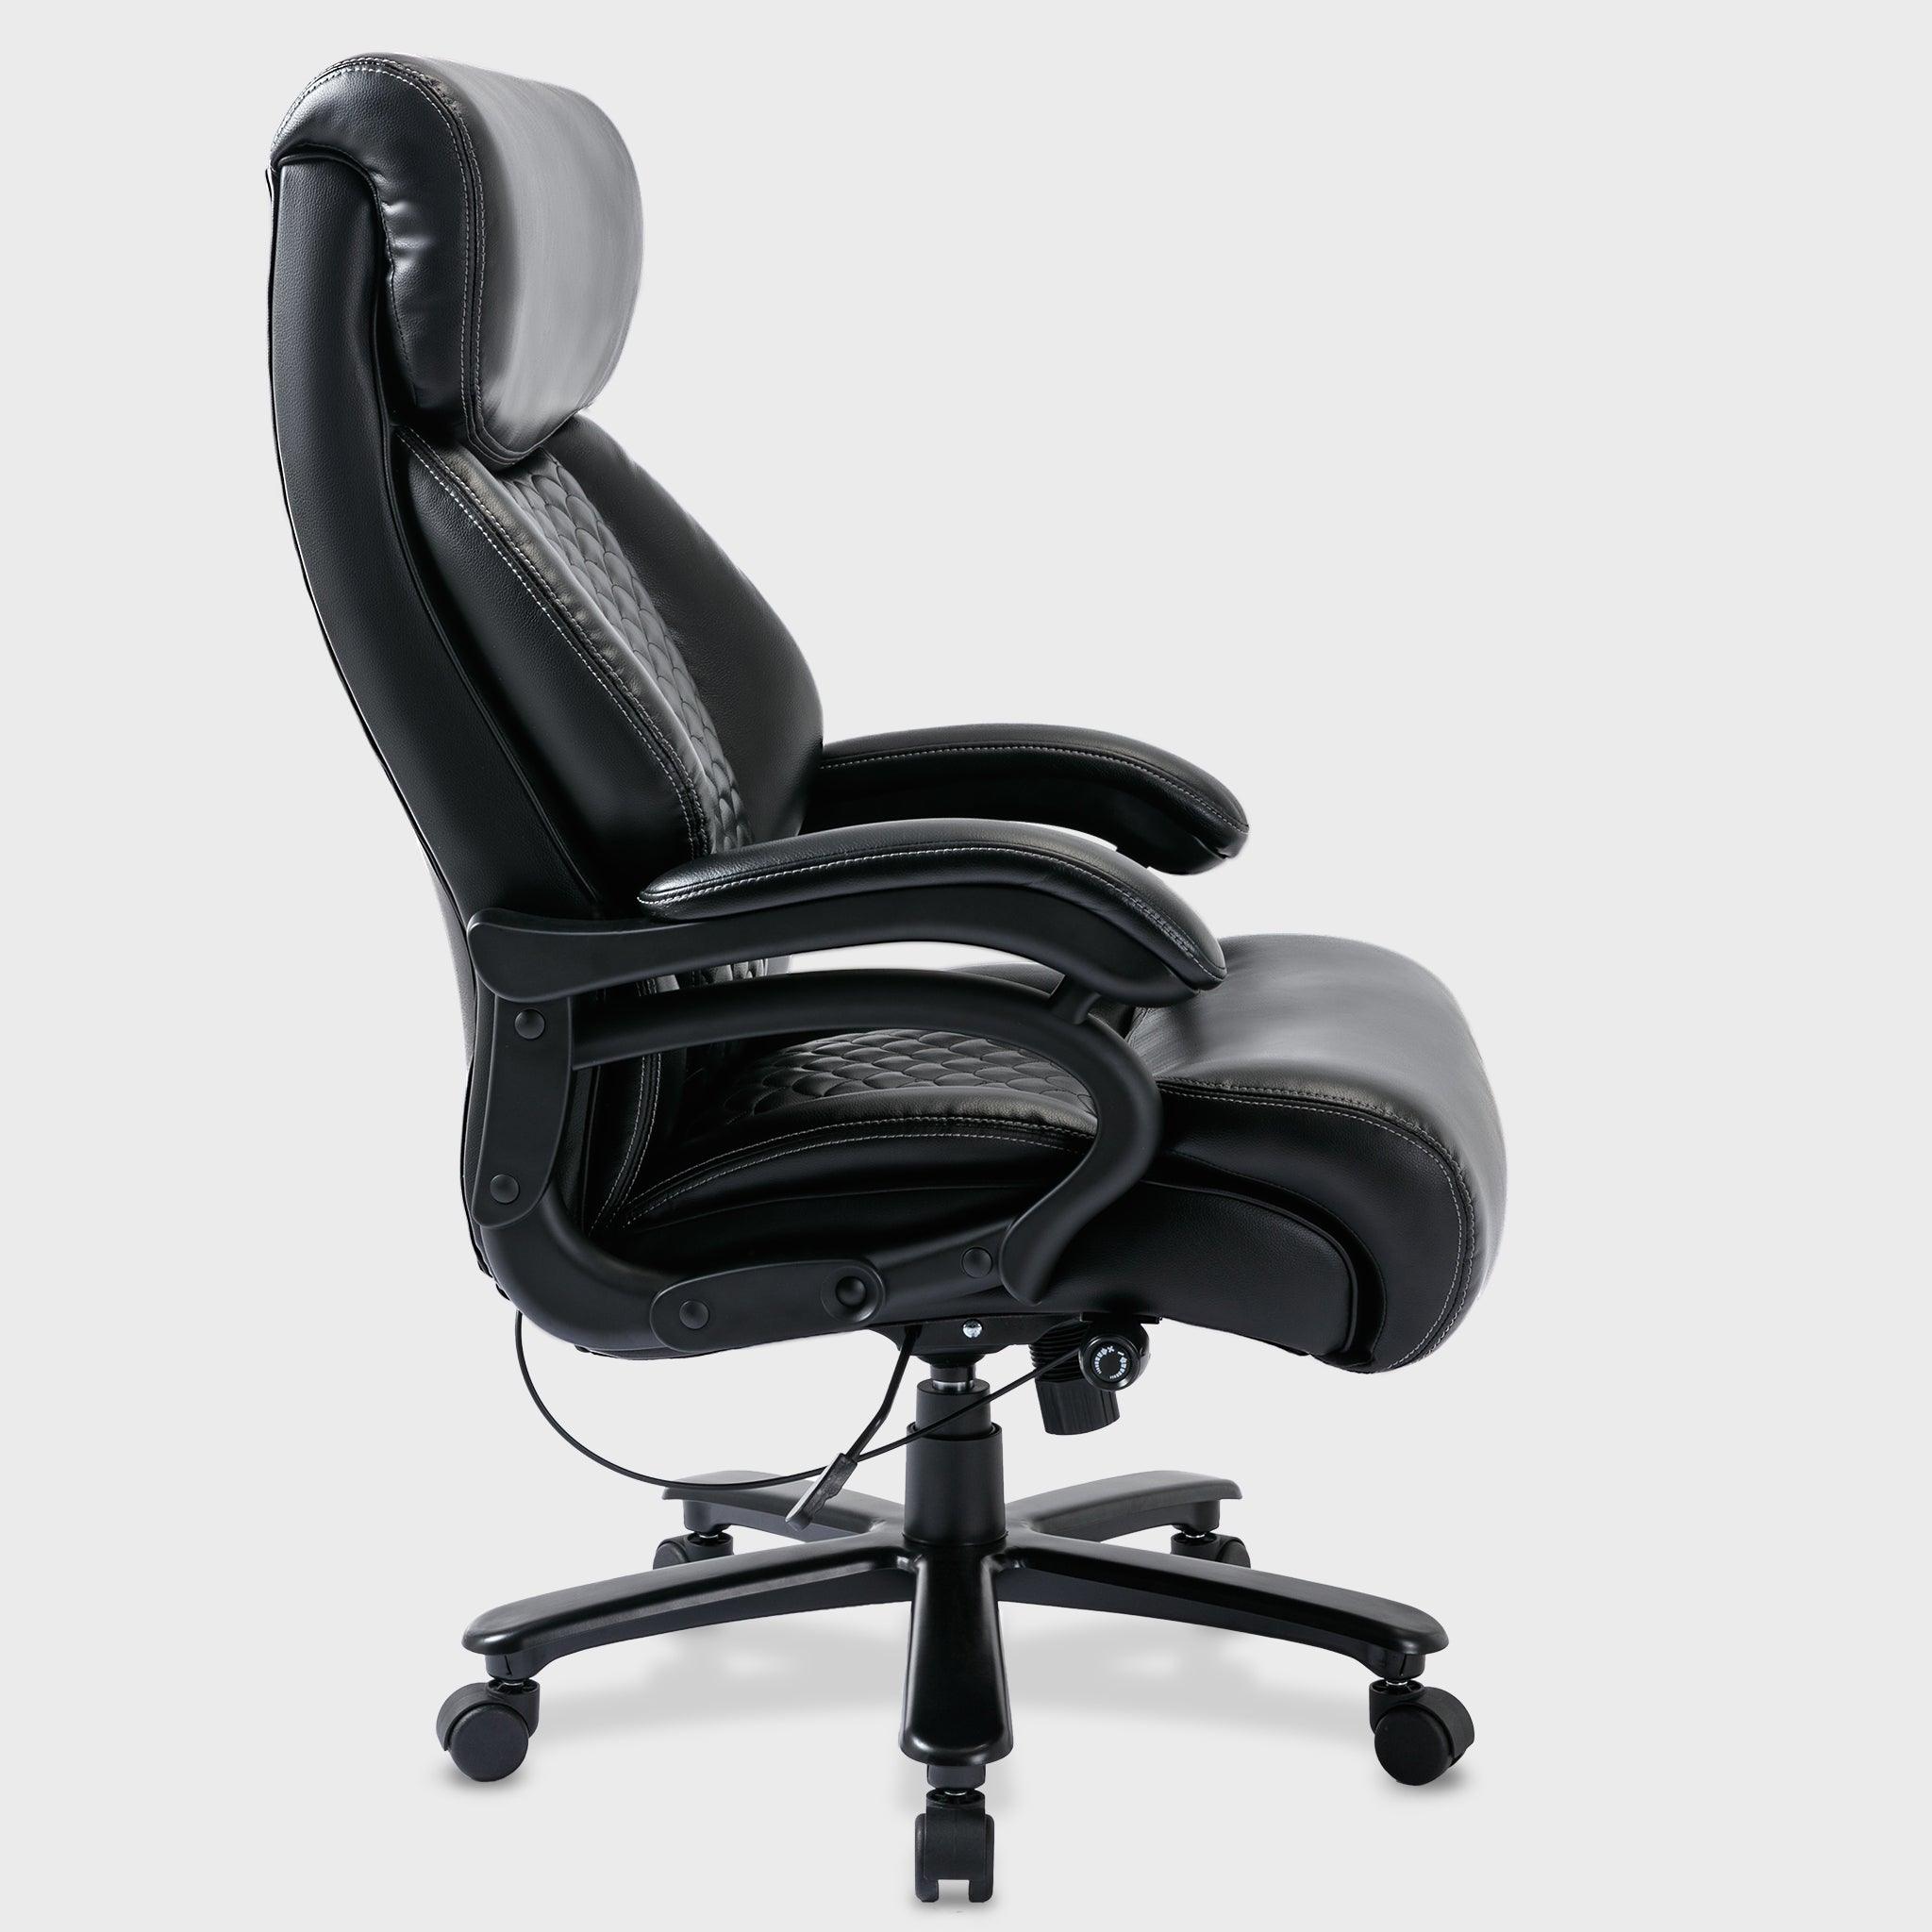 Leather Office Chair Pro 7006 - Honsit Chair